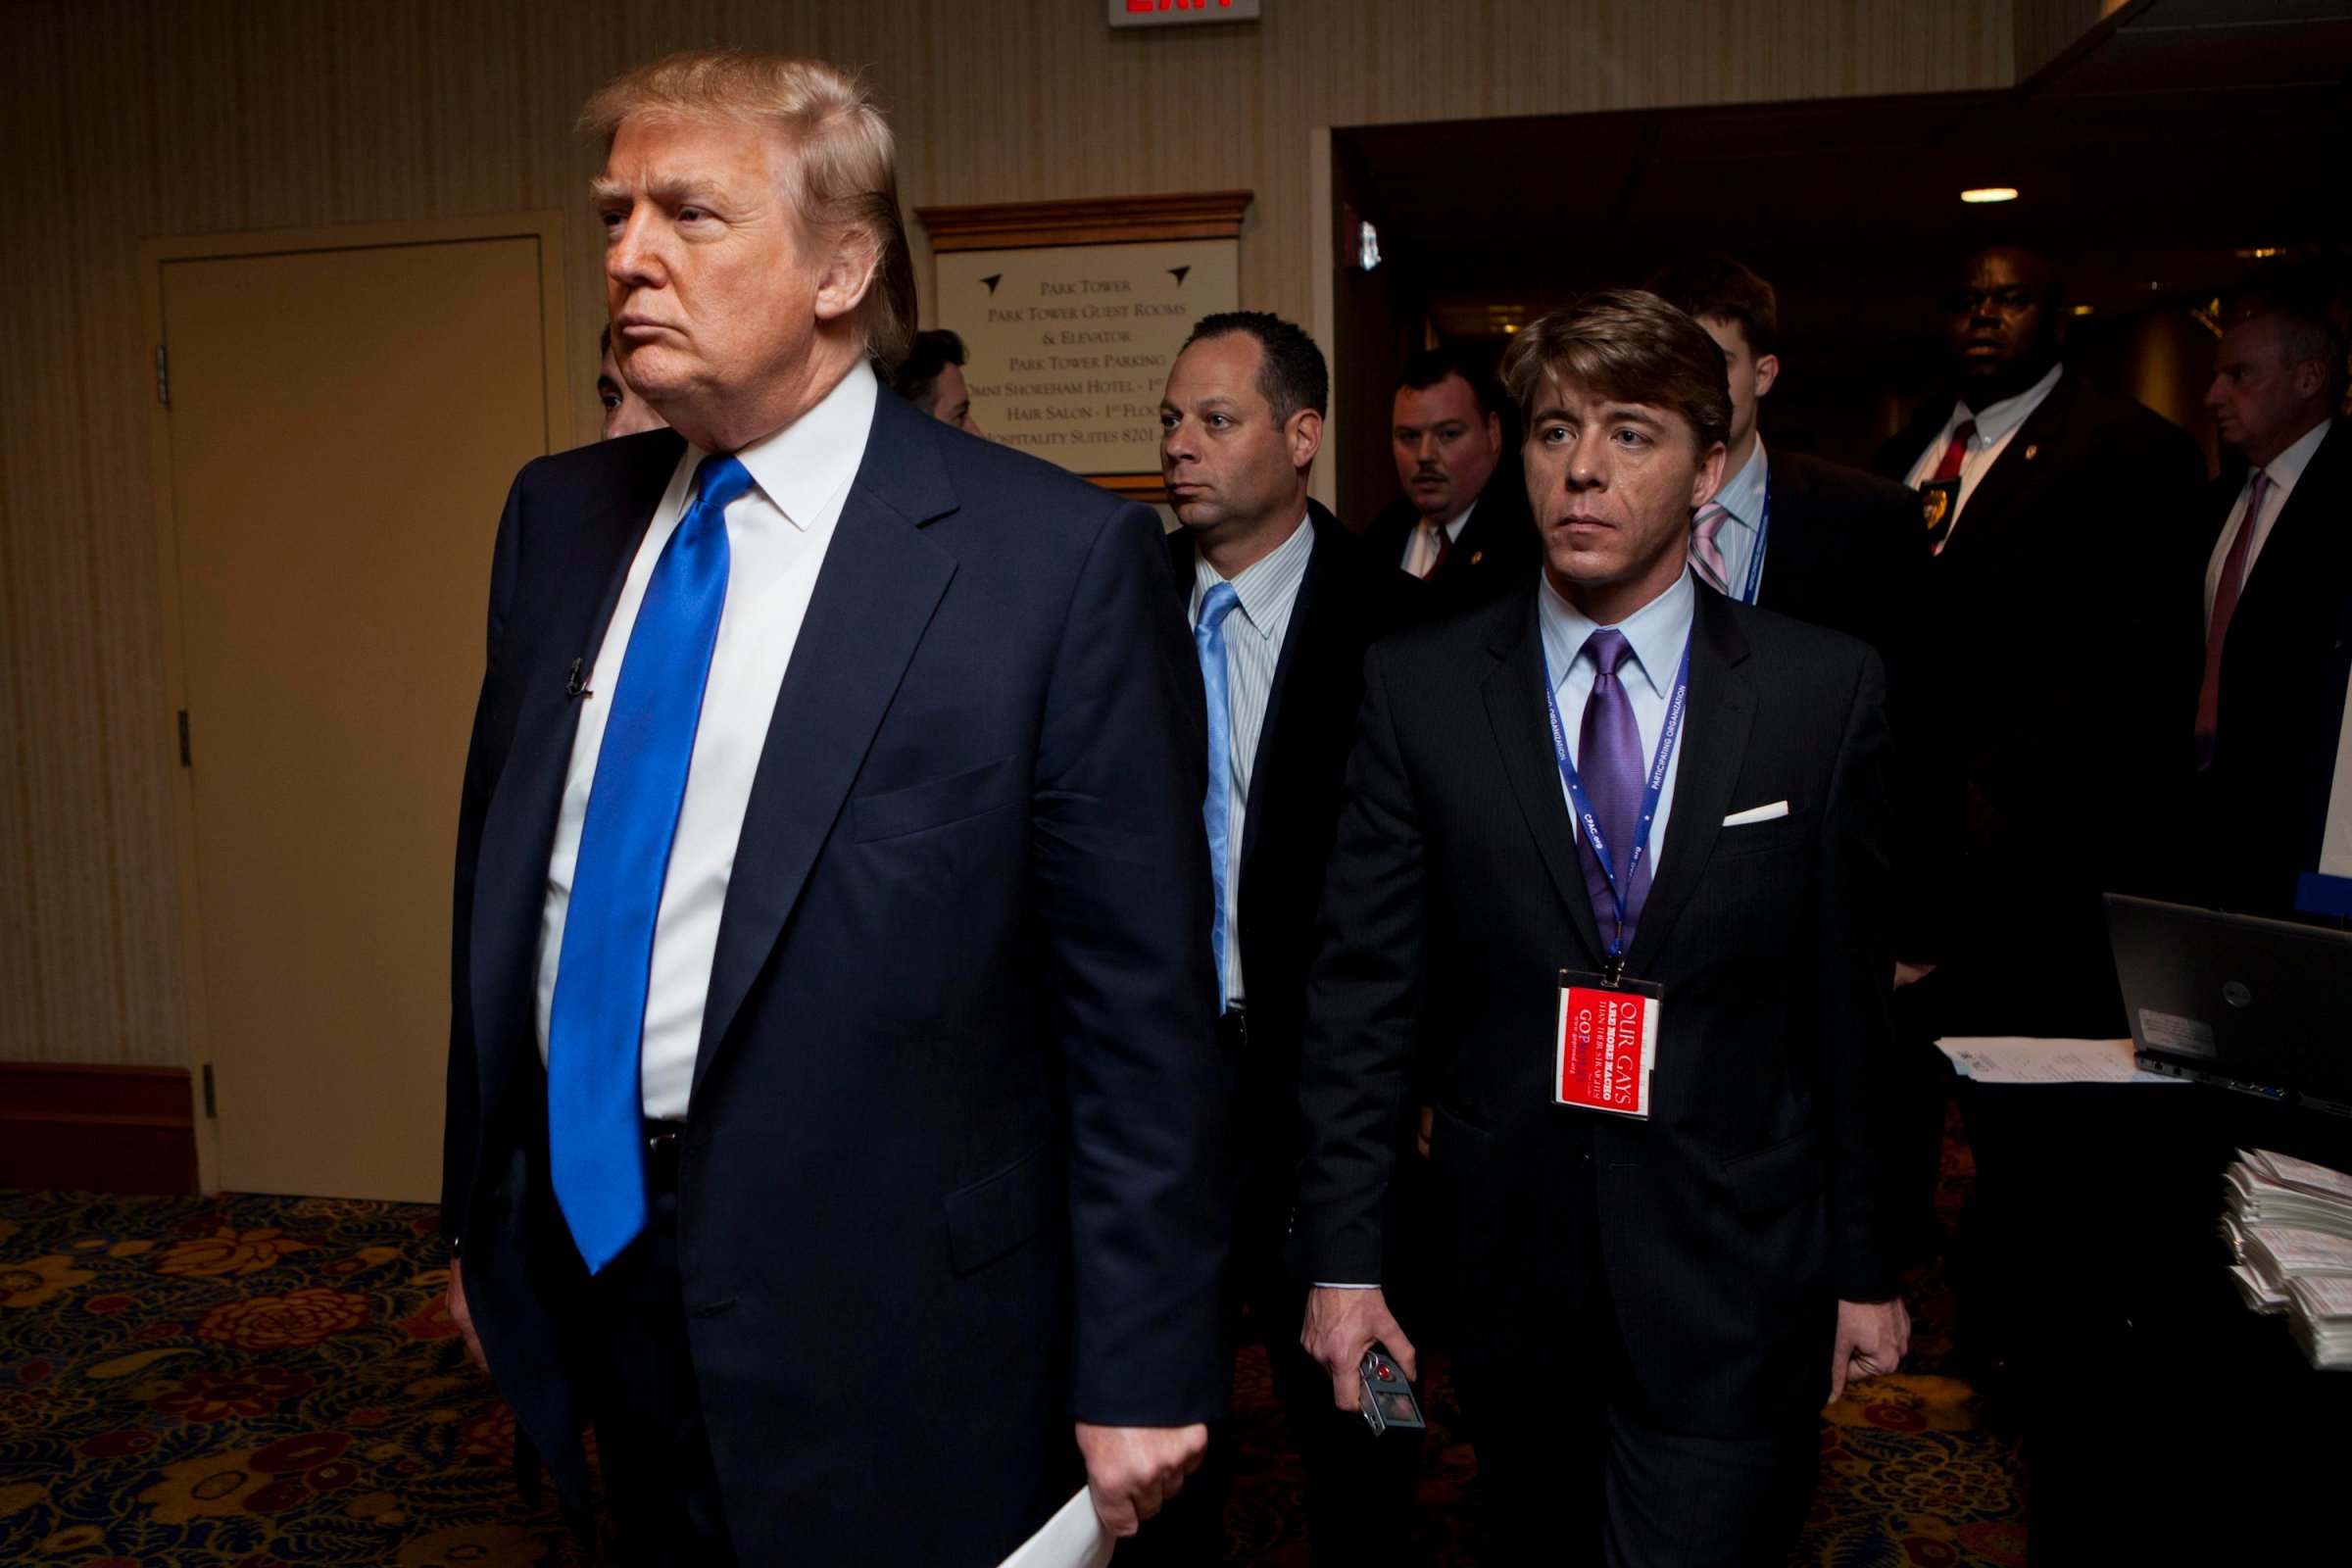 Donald Trump and Jimmy LaSalvia at the Conservative Political Action Conference in Washington, DC, on Feb. 10, 2011.